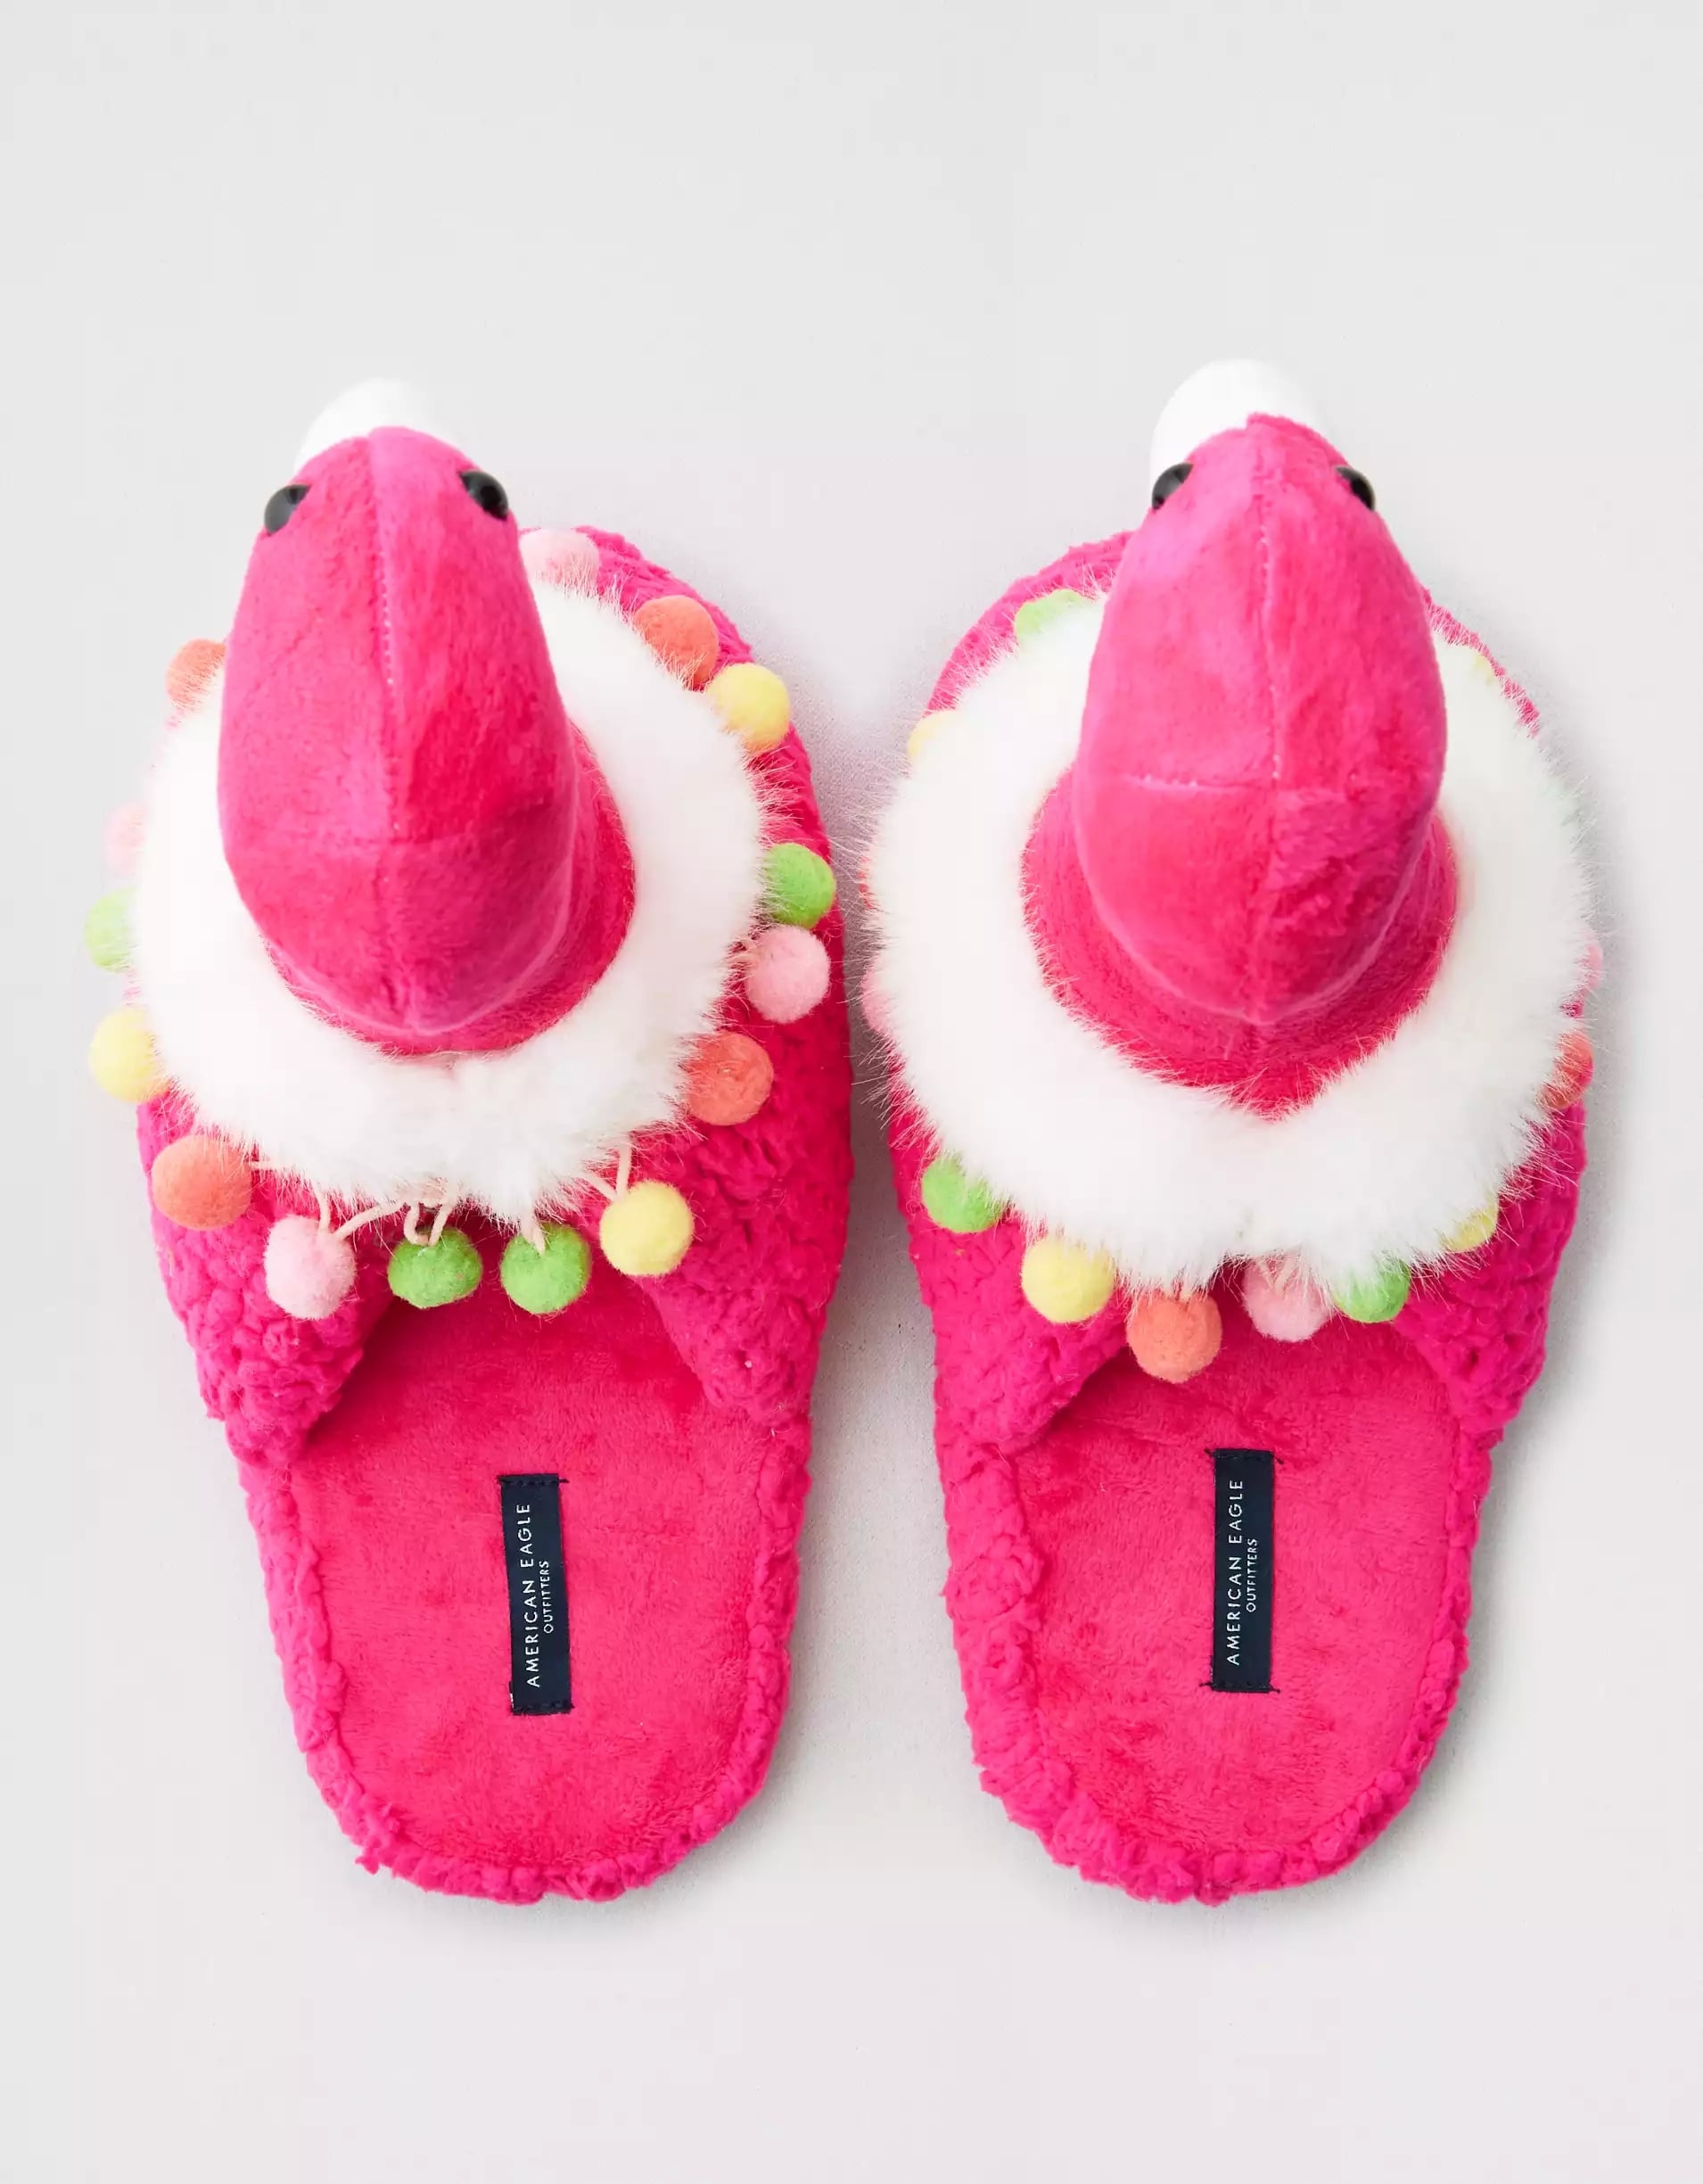 These Pink Flamingo Slippers From Are So Over the Top | POPSUGAR Smart Living